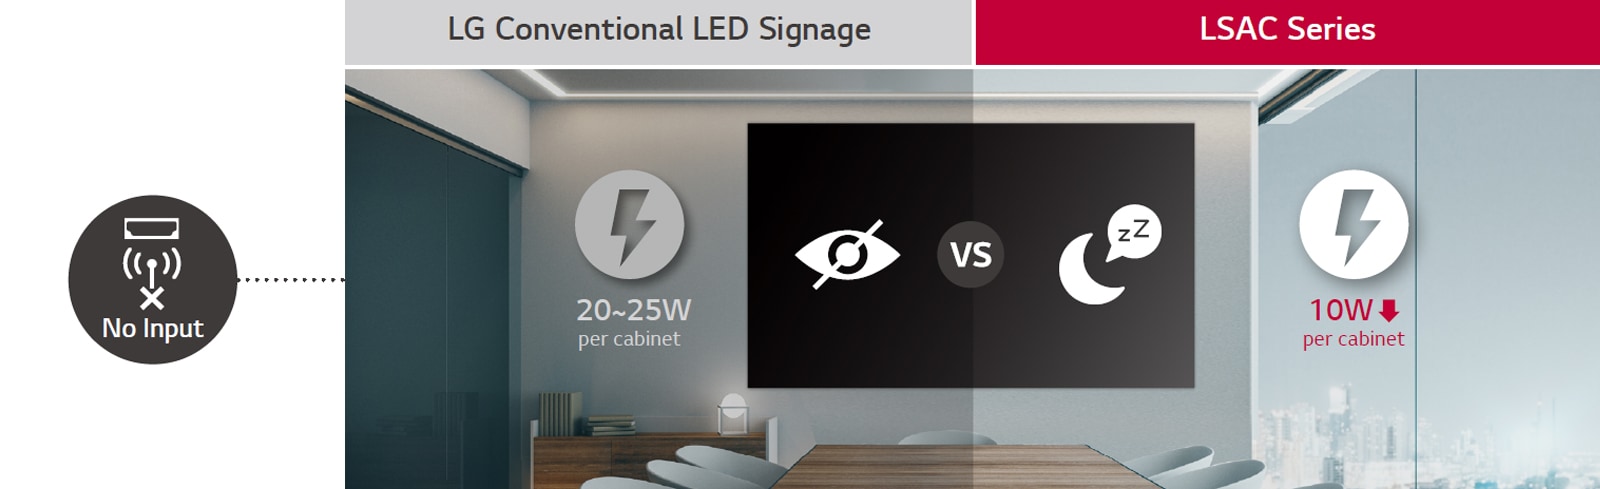 In standby mode, the LSAC series consumes less power than LG’s conventional LED signage.